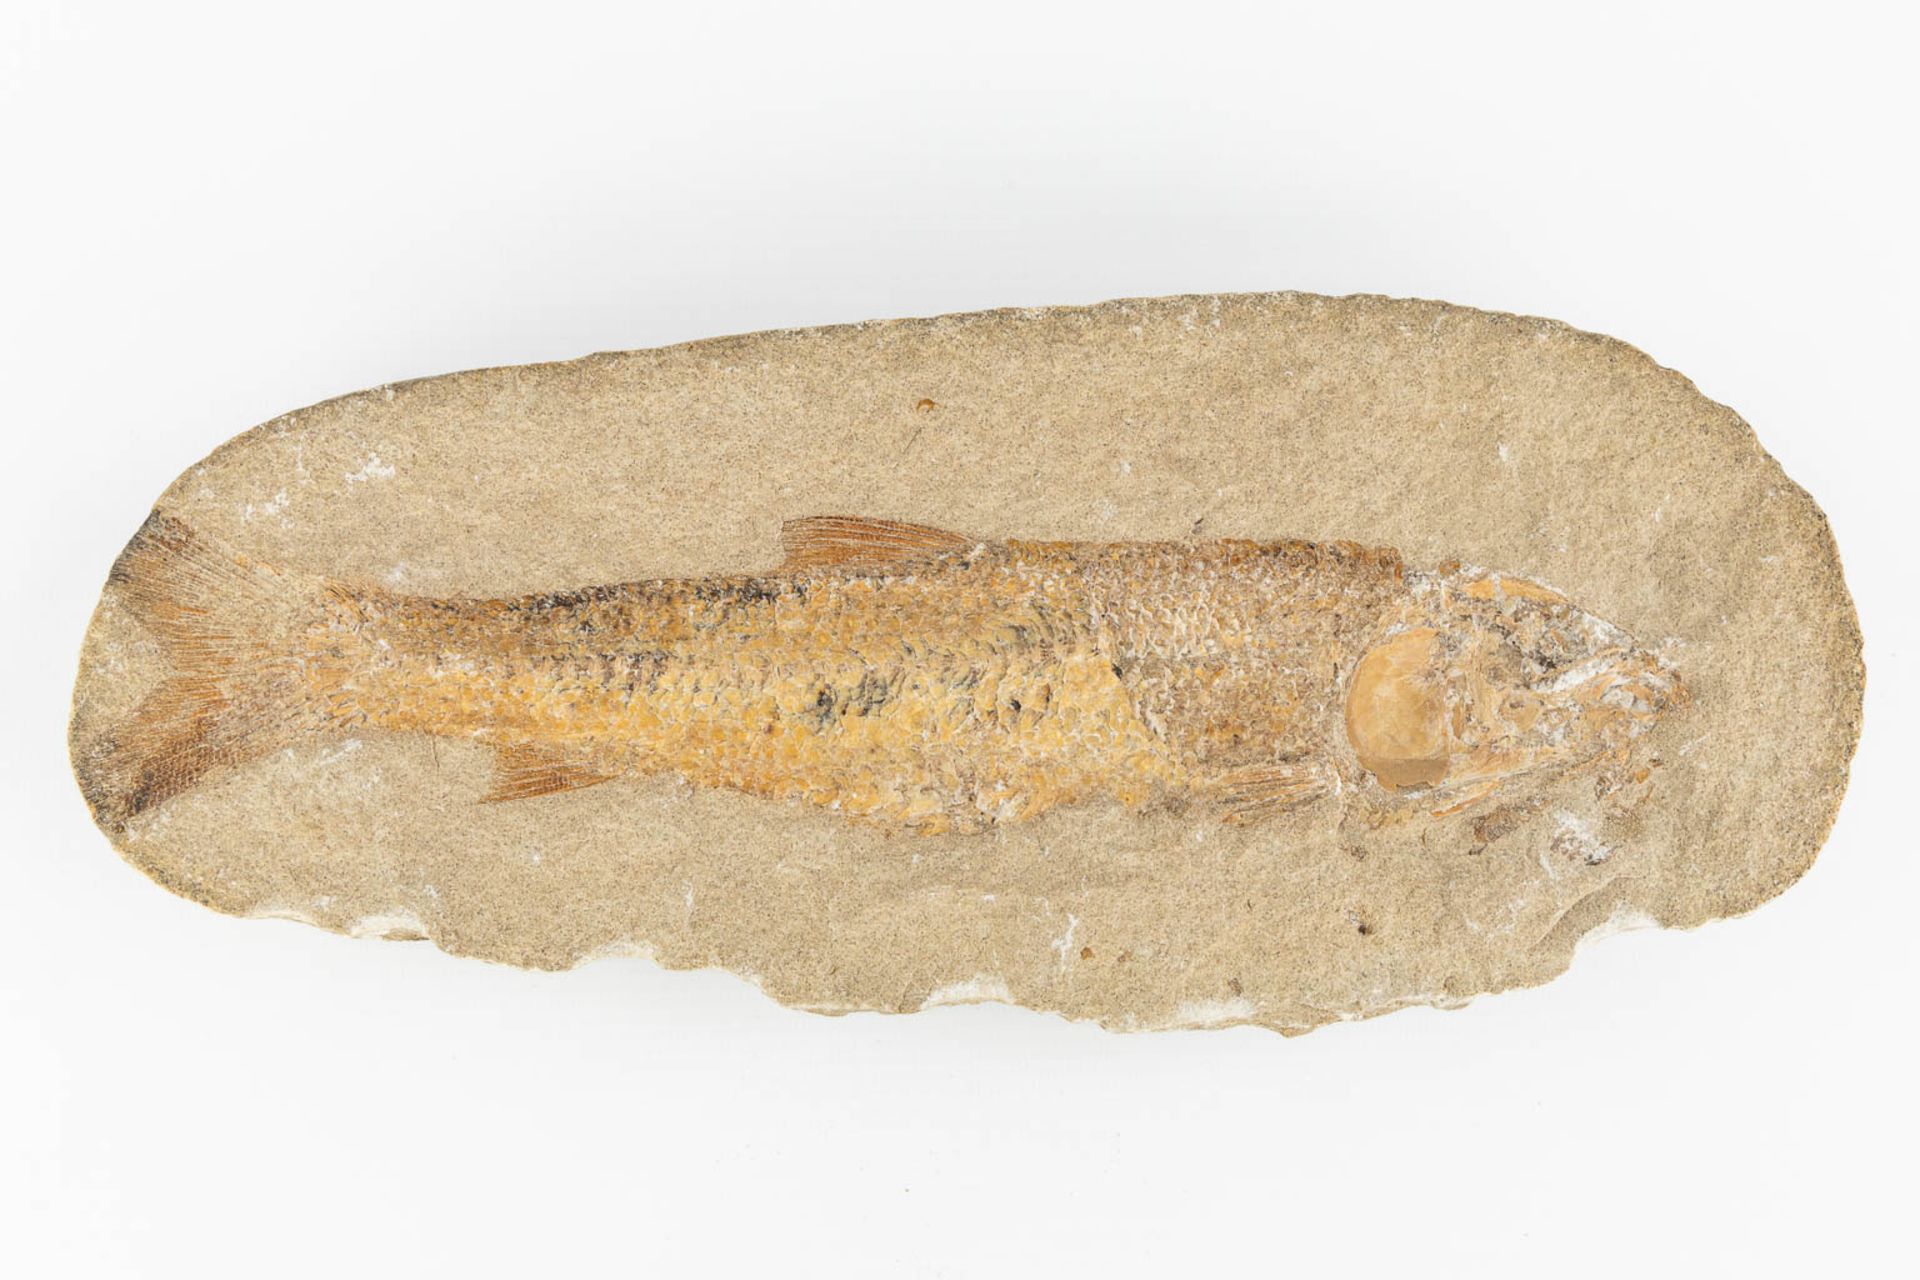 A fossil of a fish in a stone, with both pieces. (L:8 x W:32 x H:15 cm) - Bild 3 aus 11